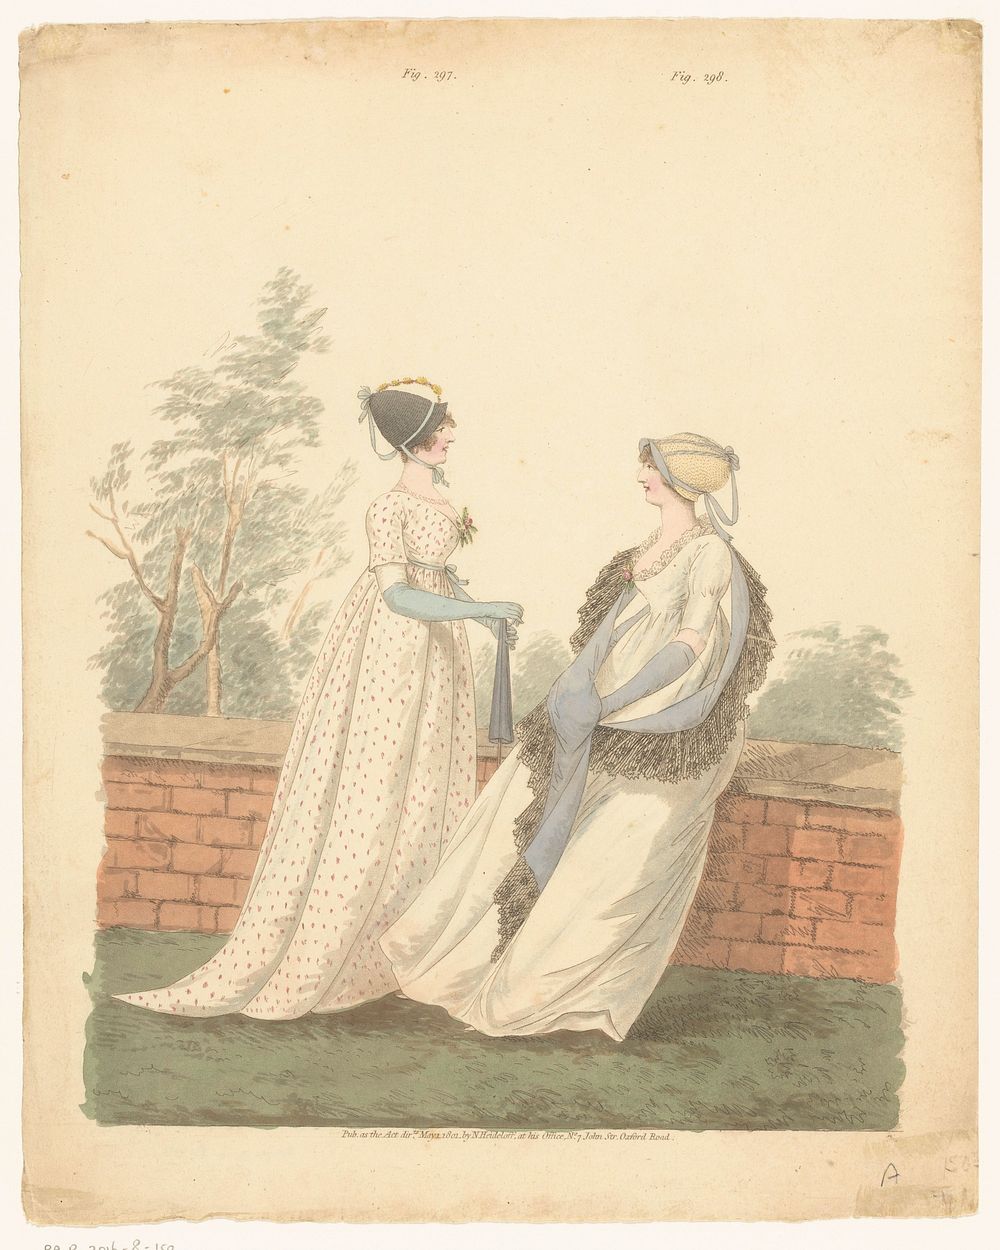 Gallery of Fashion (1801) by anonymous and Nicolaus Heideloff